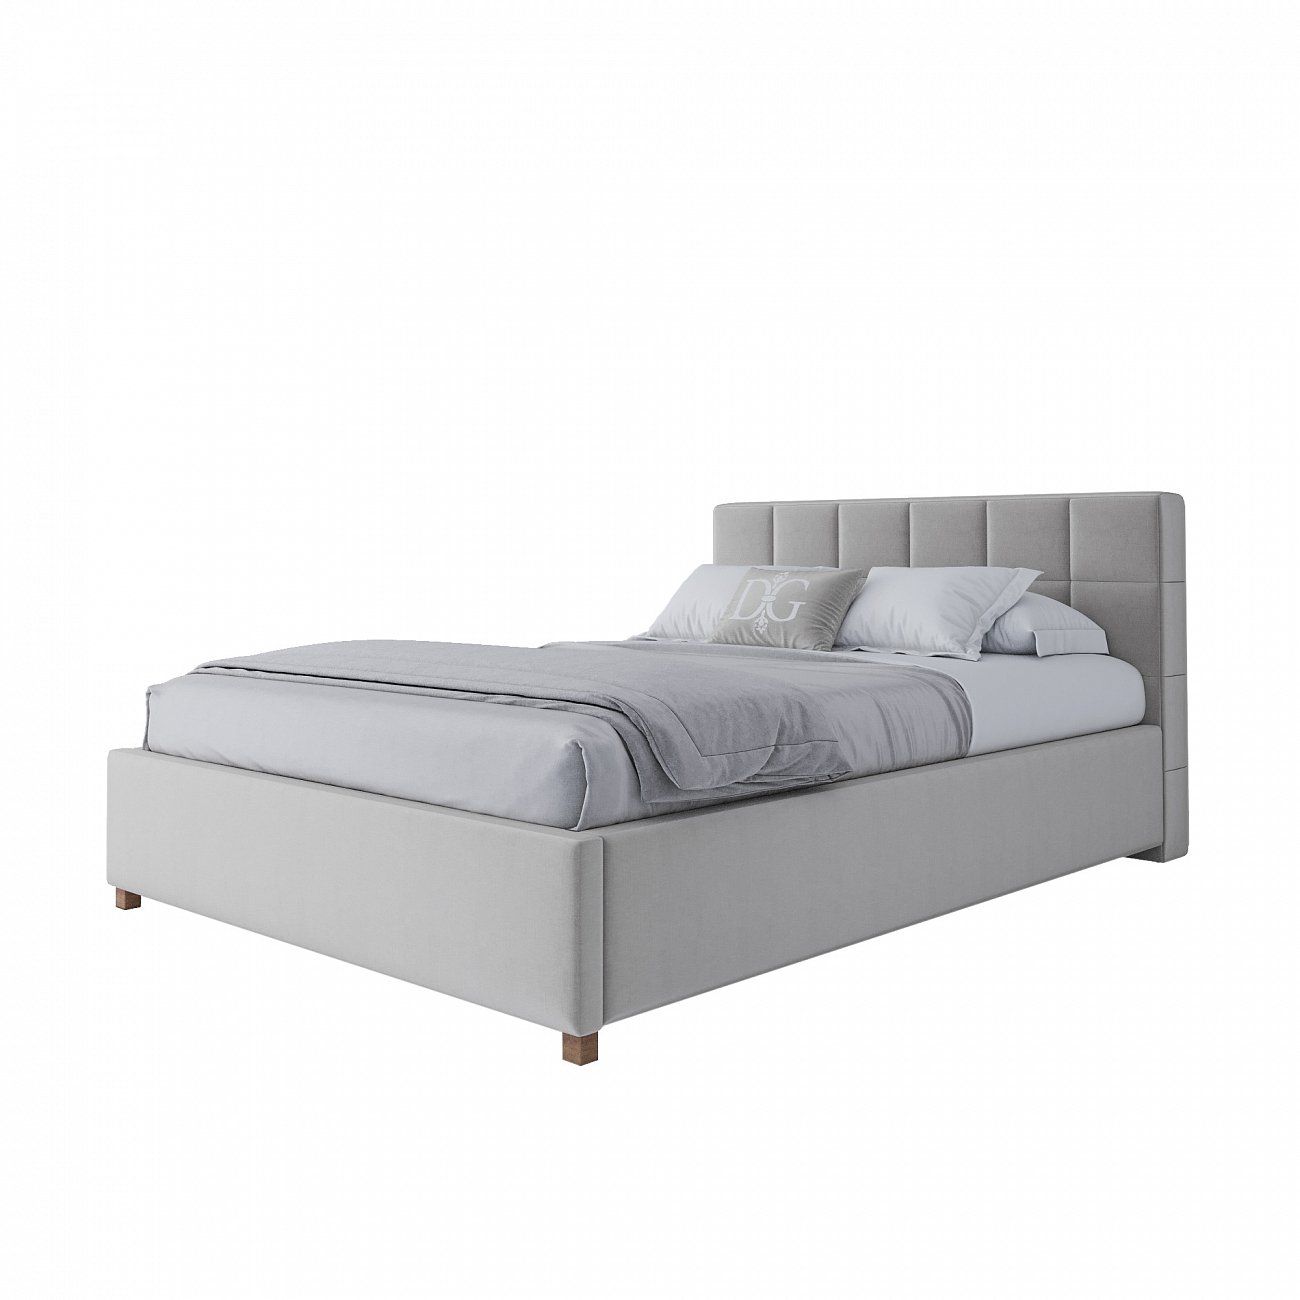 Teenage bed with a soft backrest 140x200 cm light beige Wales